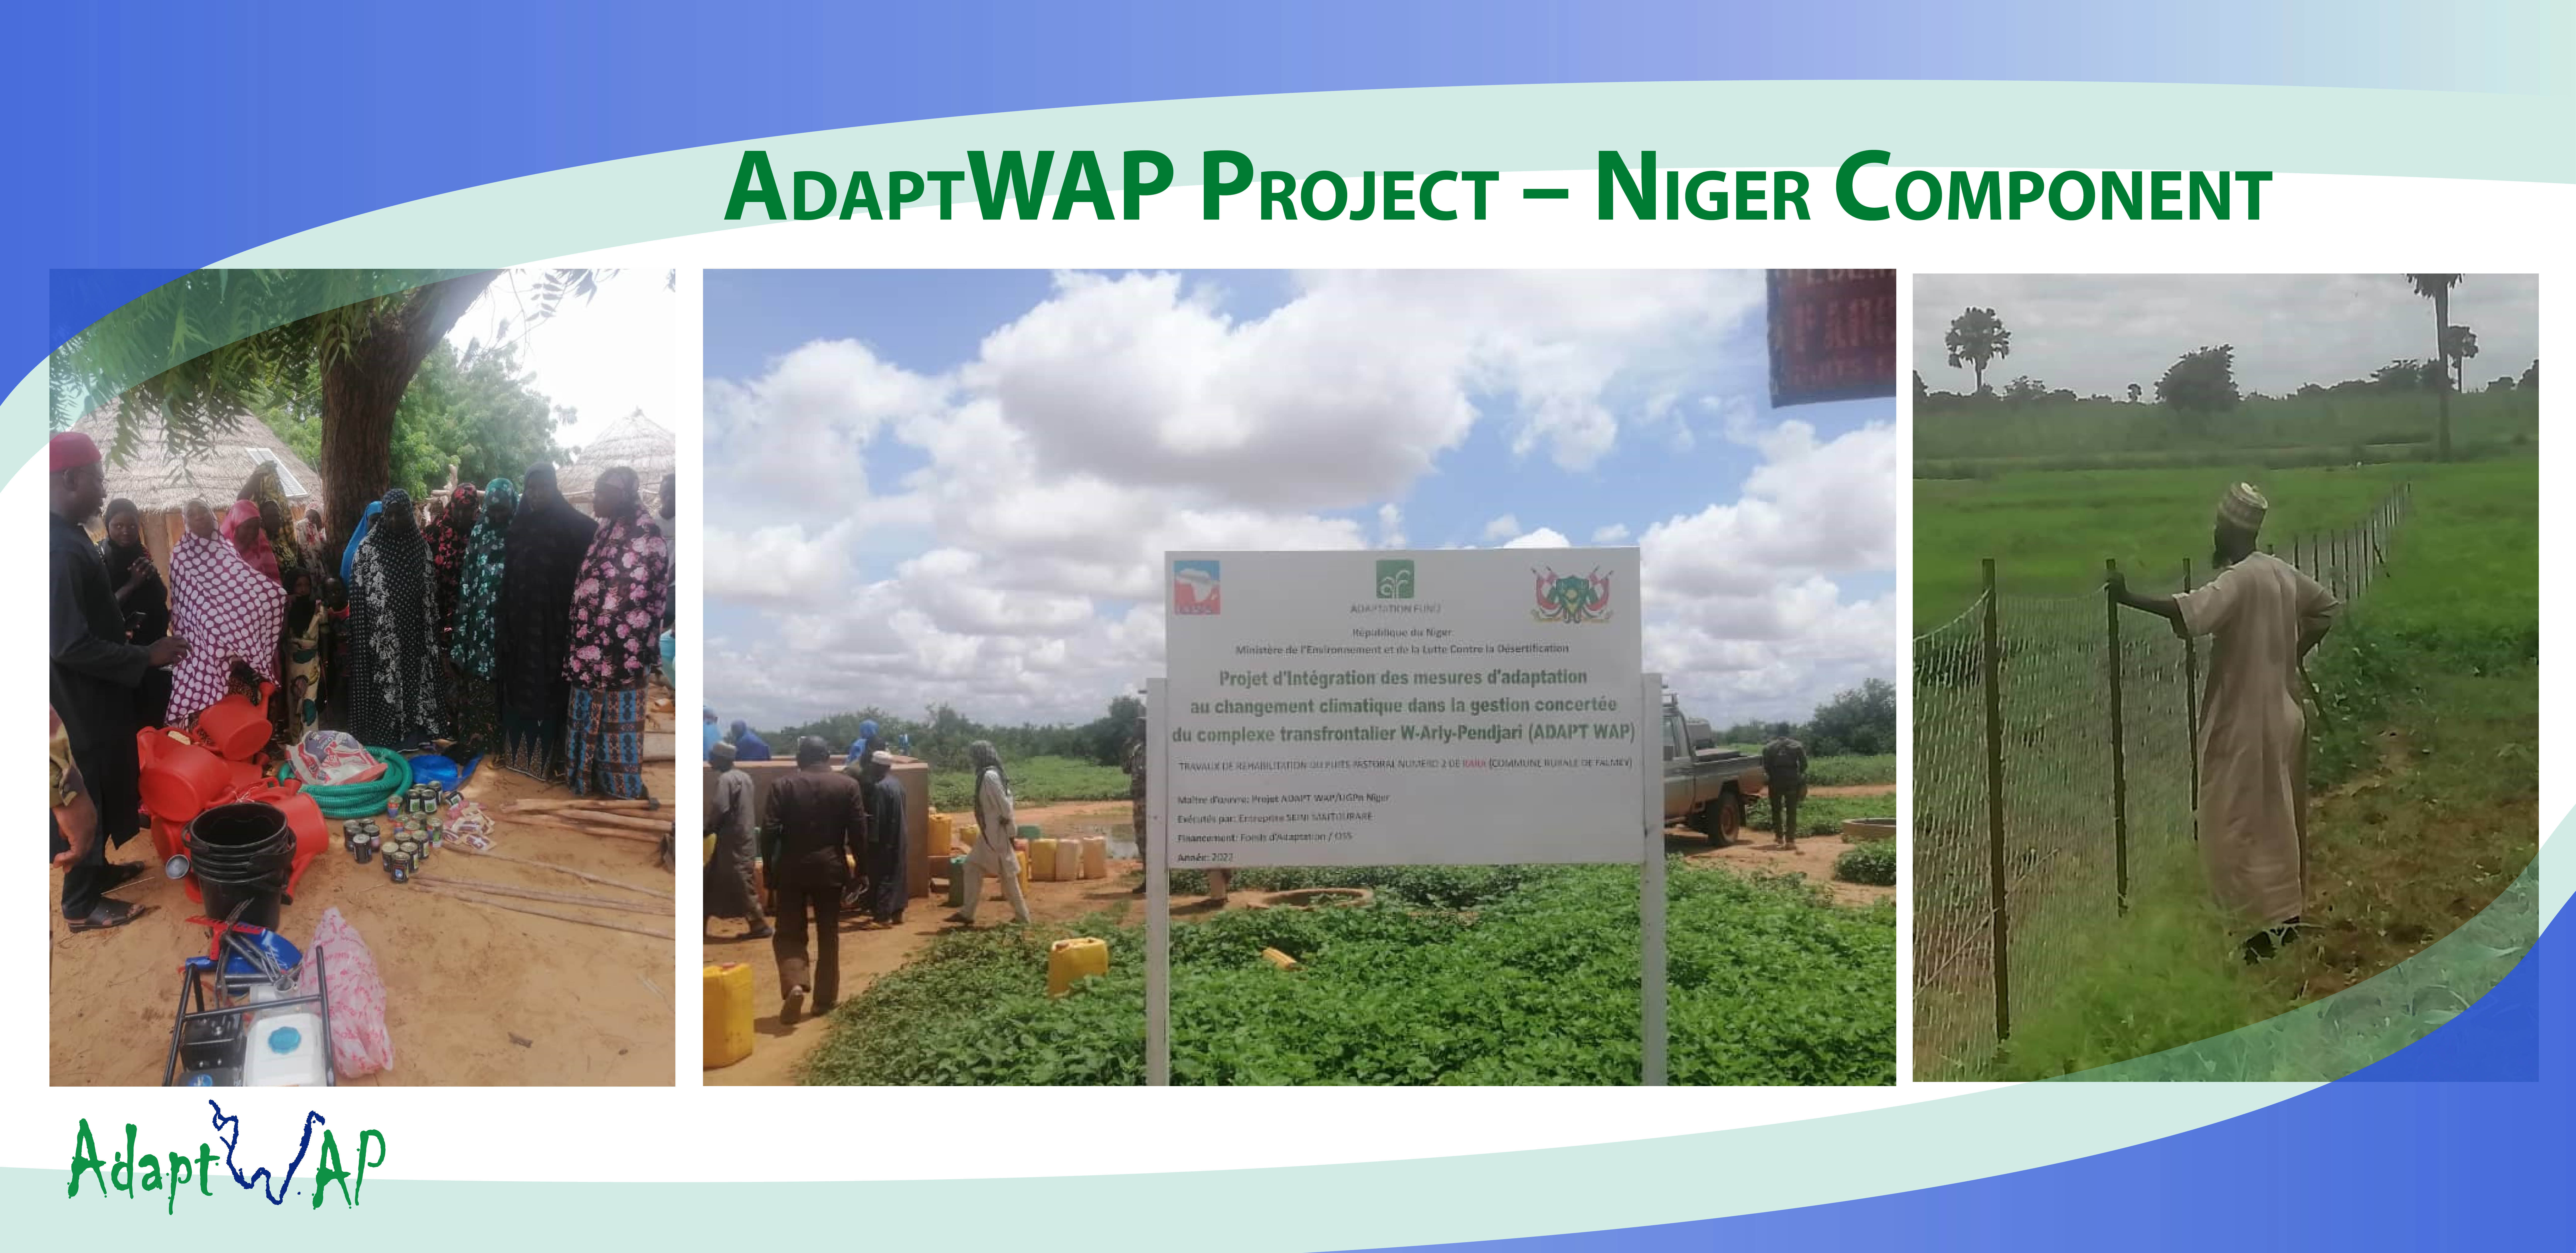  August 2022: the Niger component of the AdaptWAP project provides groups of women market gardeners with irrigation equipment